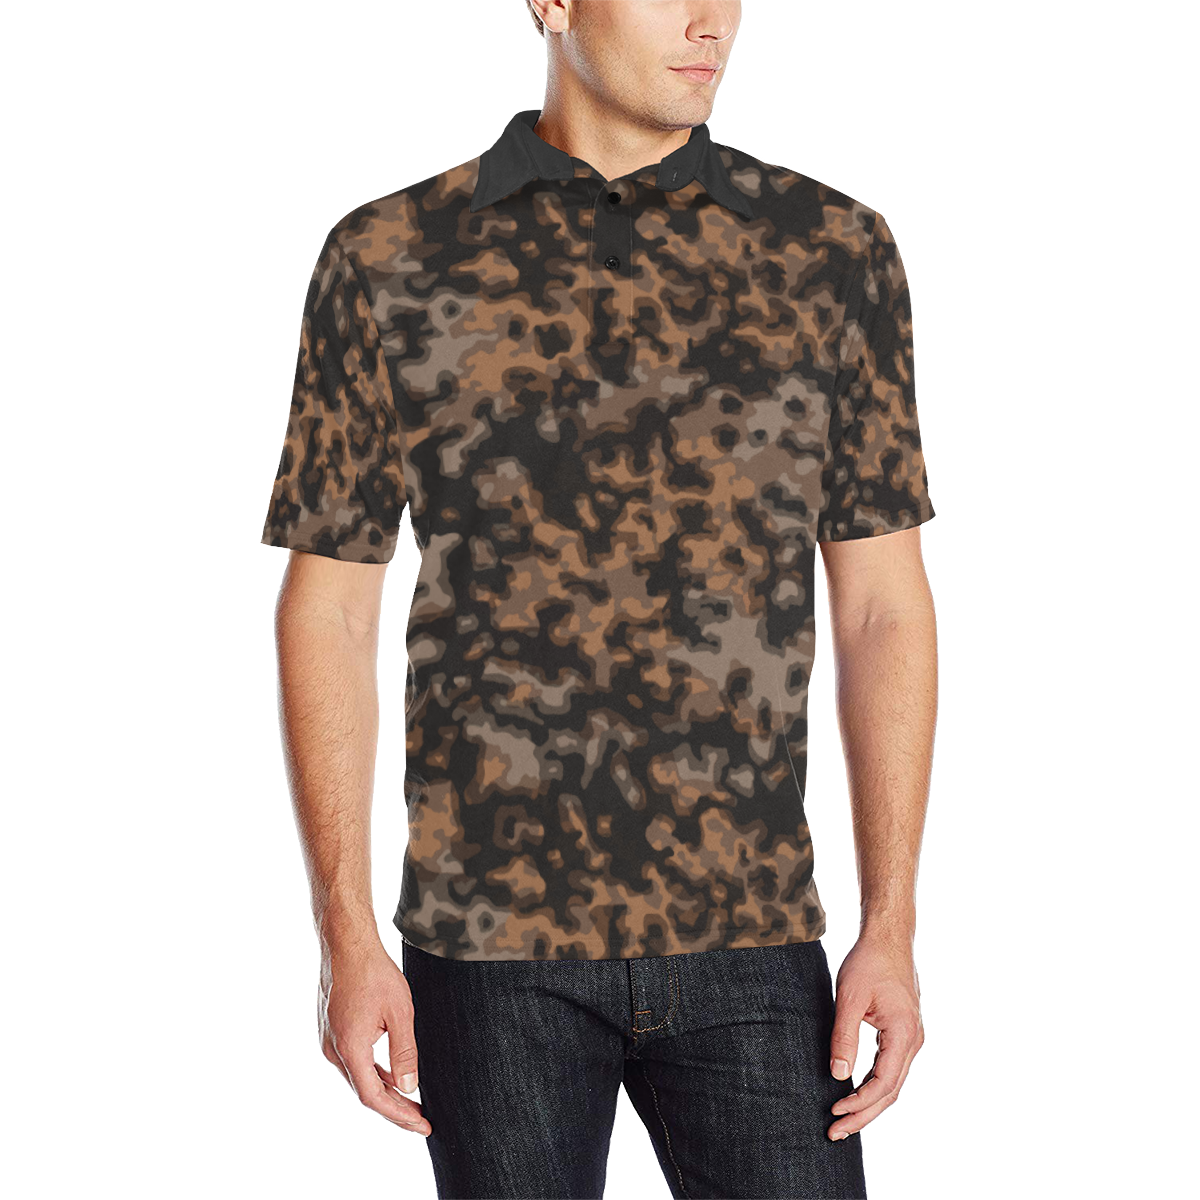 rauchtarn autumn camouflage Men's All Over Print Polo Shirt (Model T55)